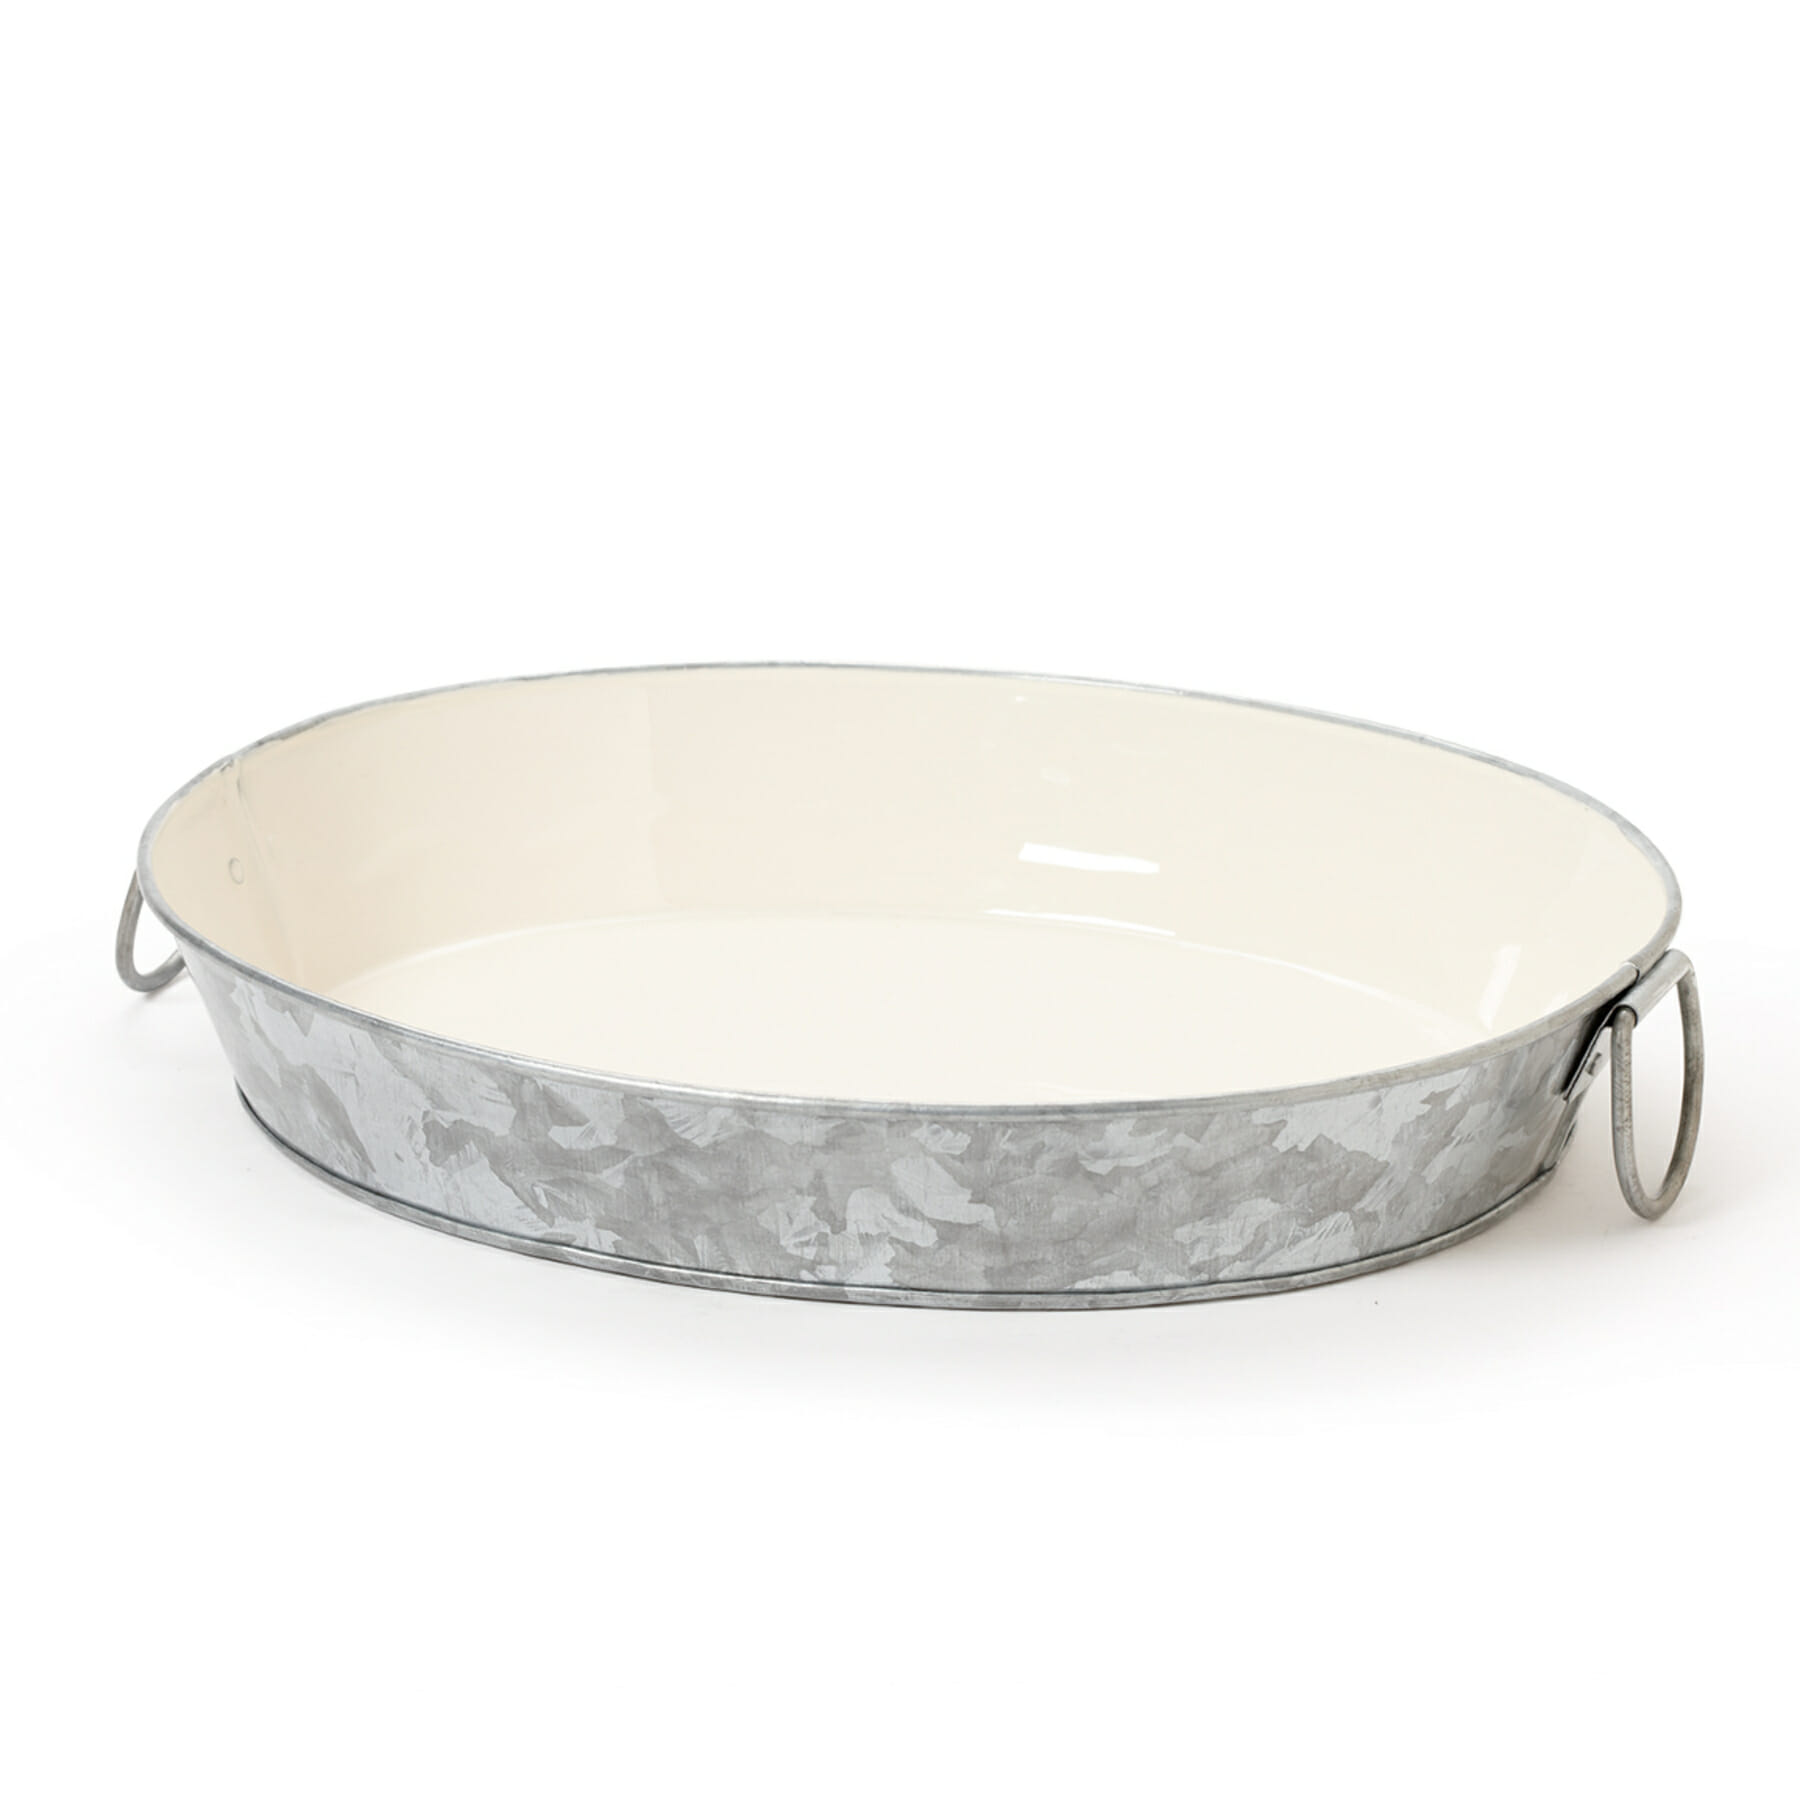 11.75" x 8" Oval Galvanized Tray with Ivory Powder Coated Interior (15.5" with Handles), 1.8" deep